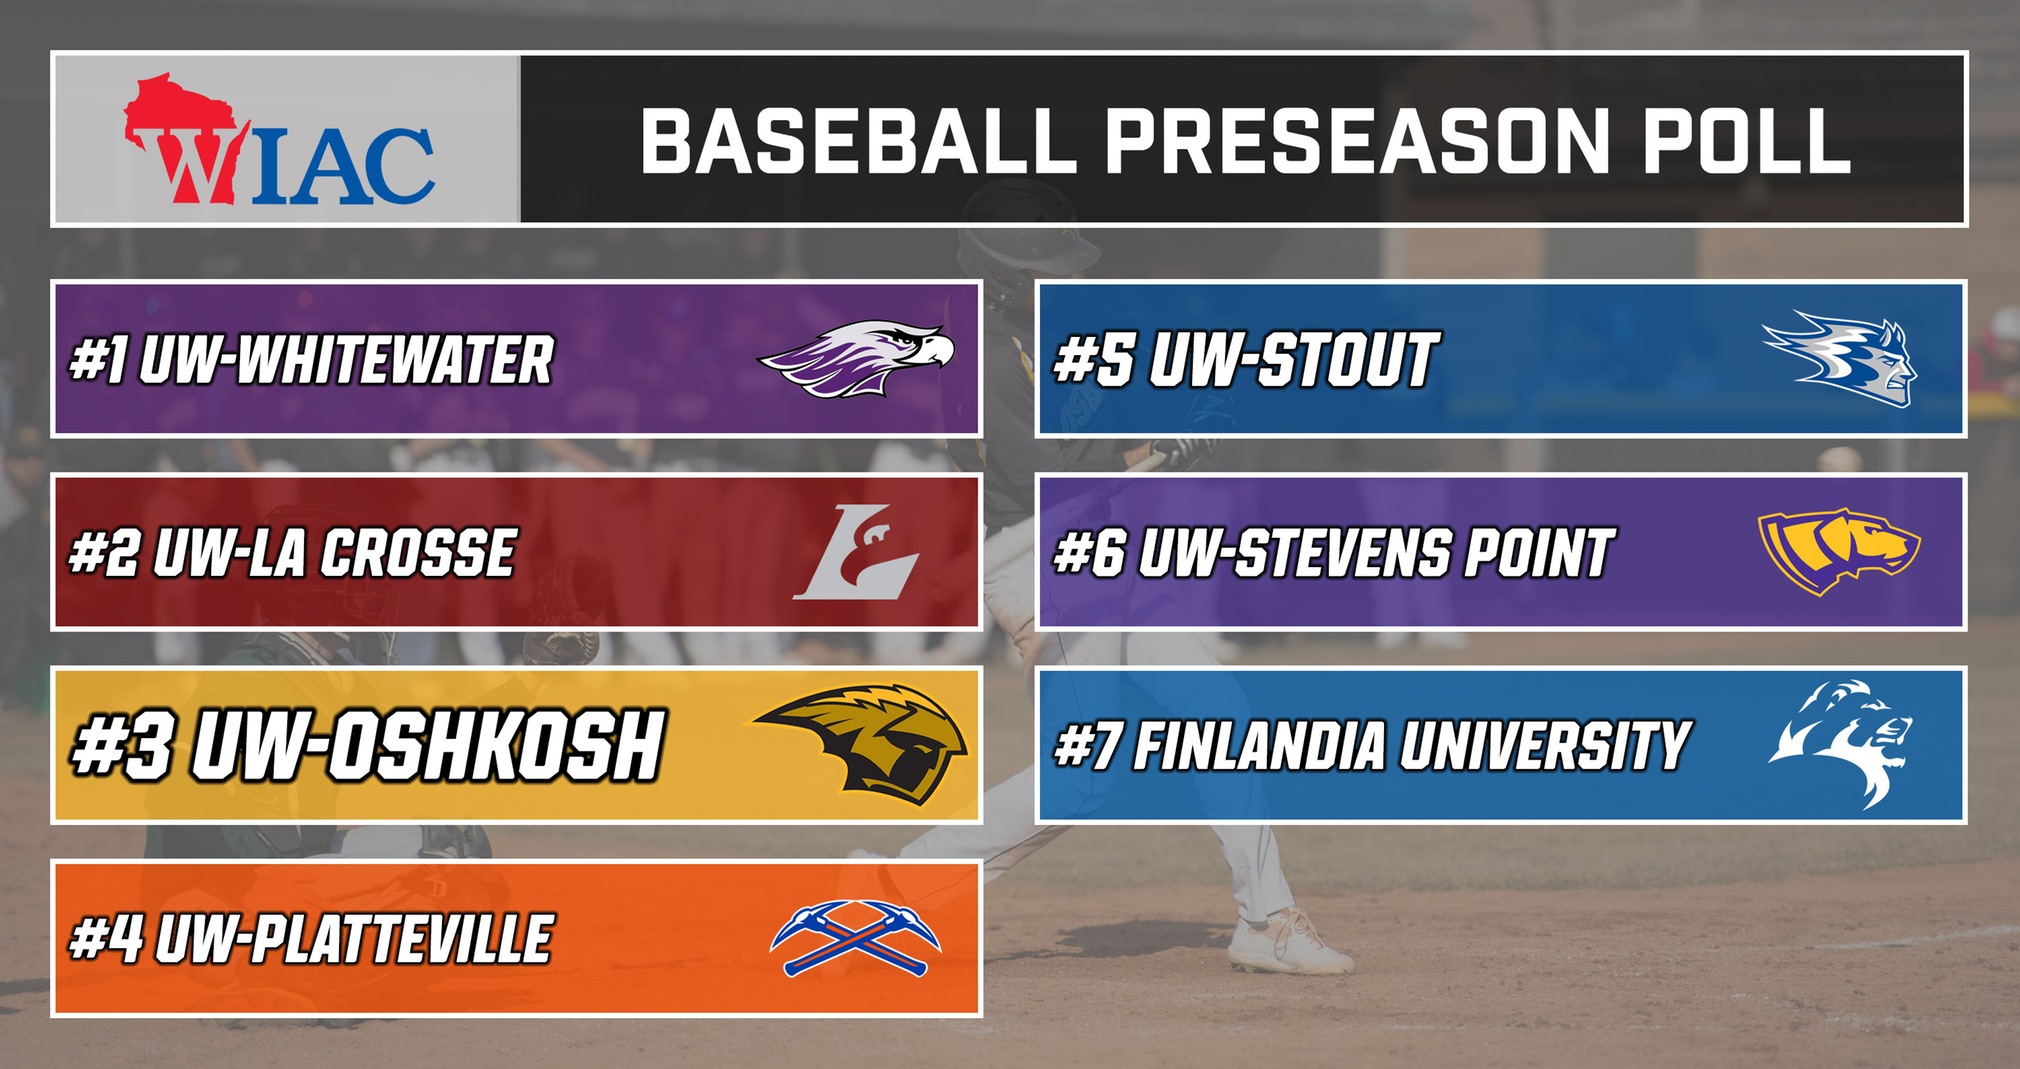 Titans Projected To Finish Third In WIAC Baseball Standings